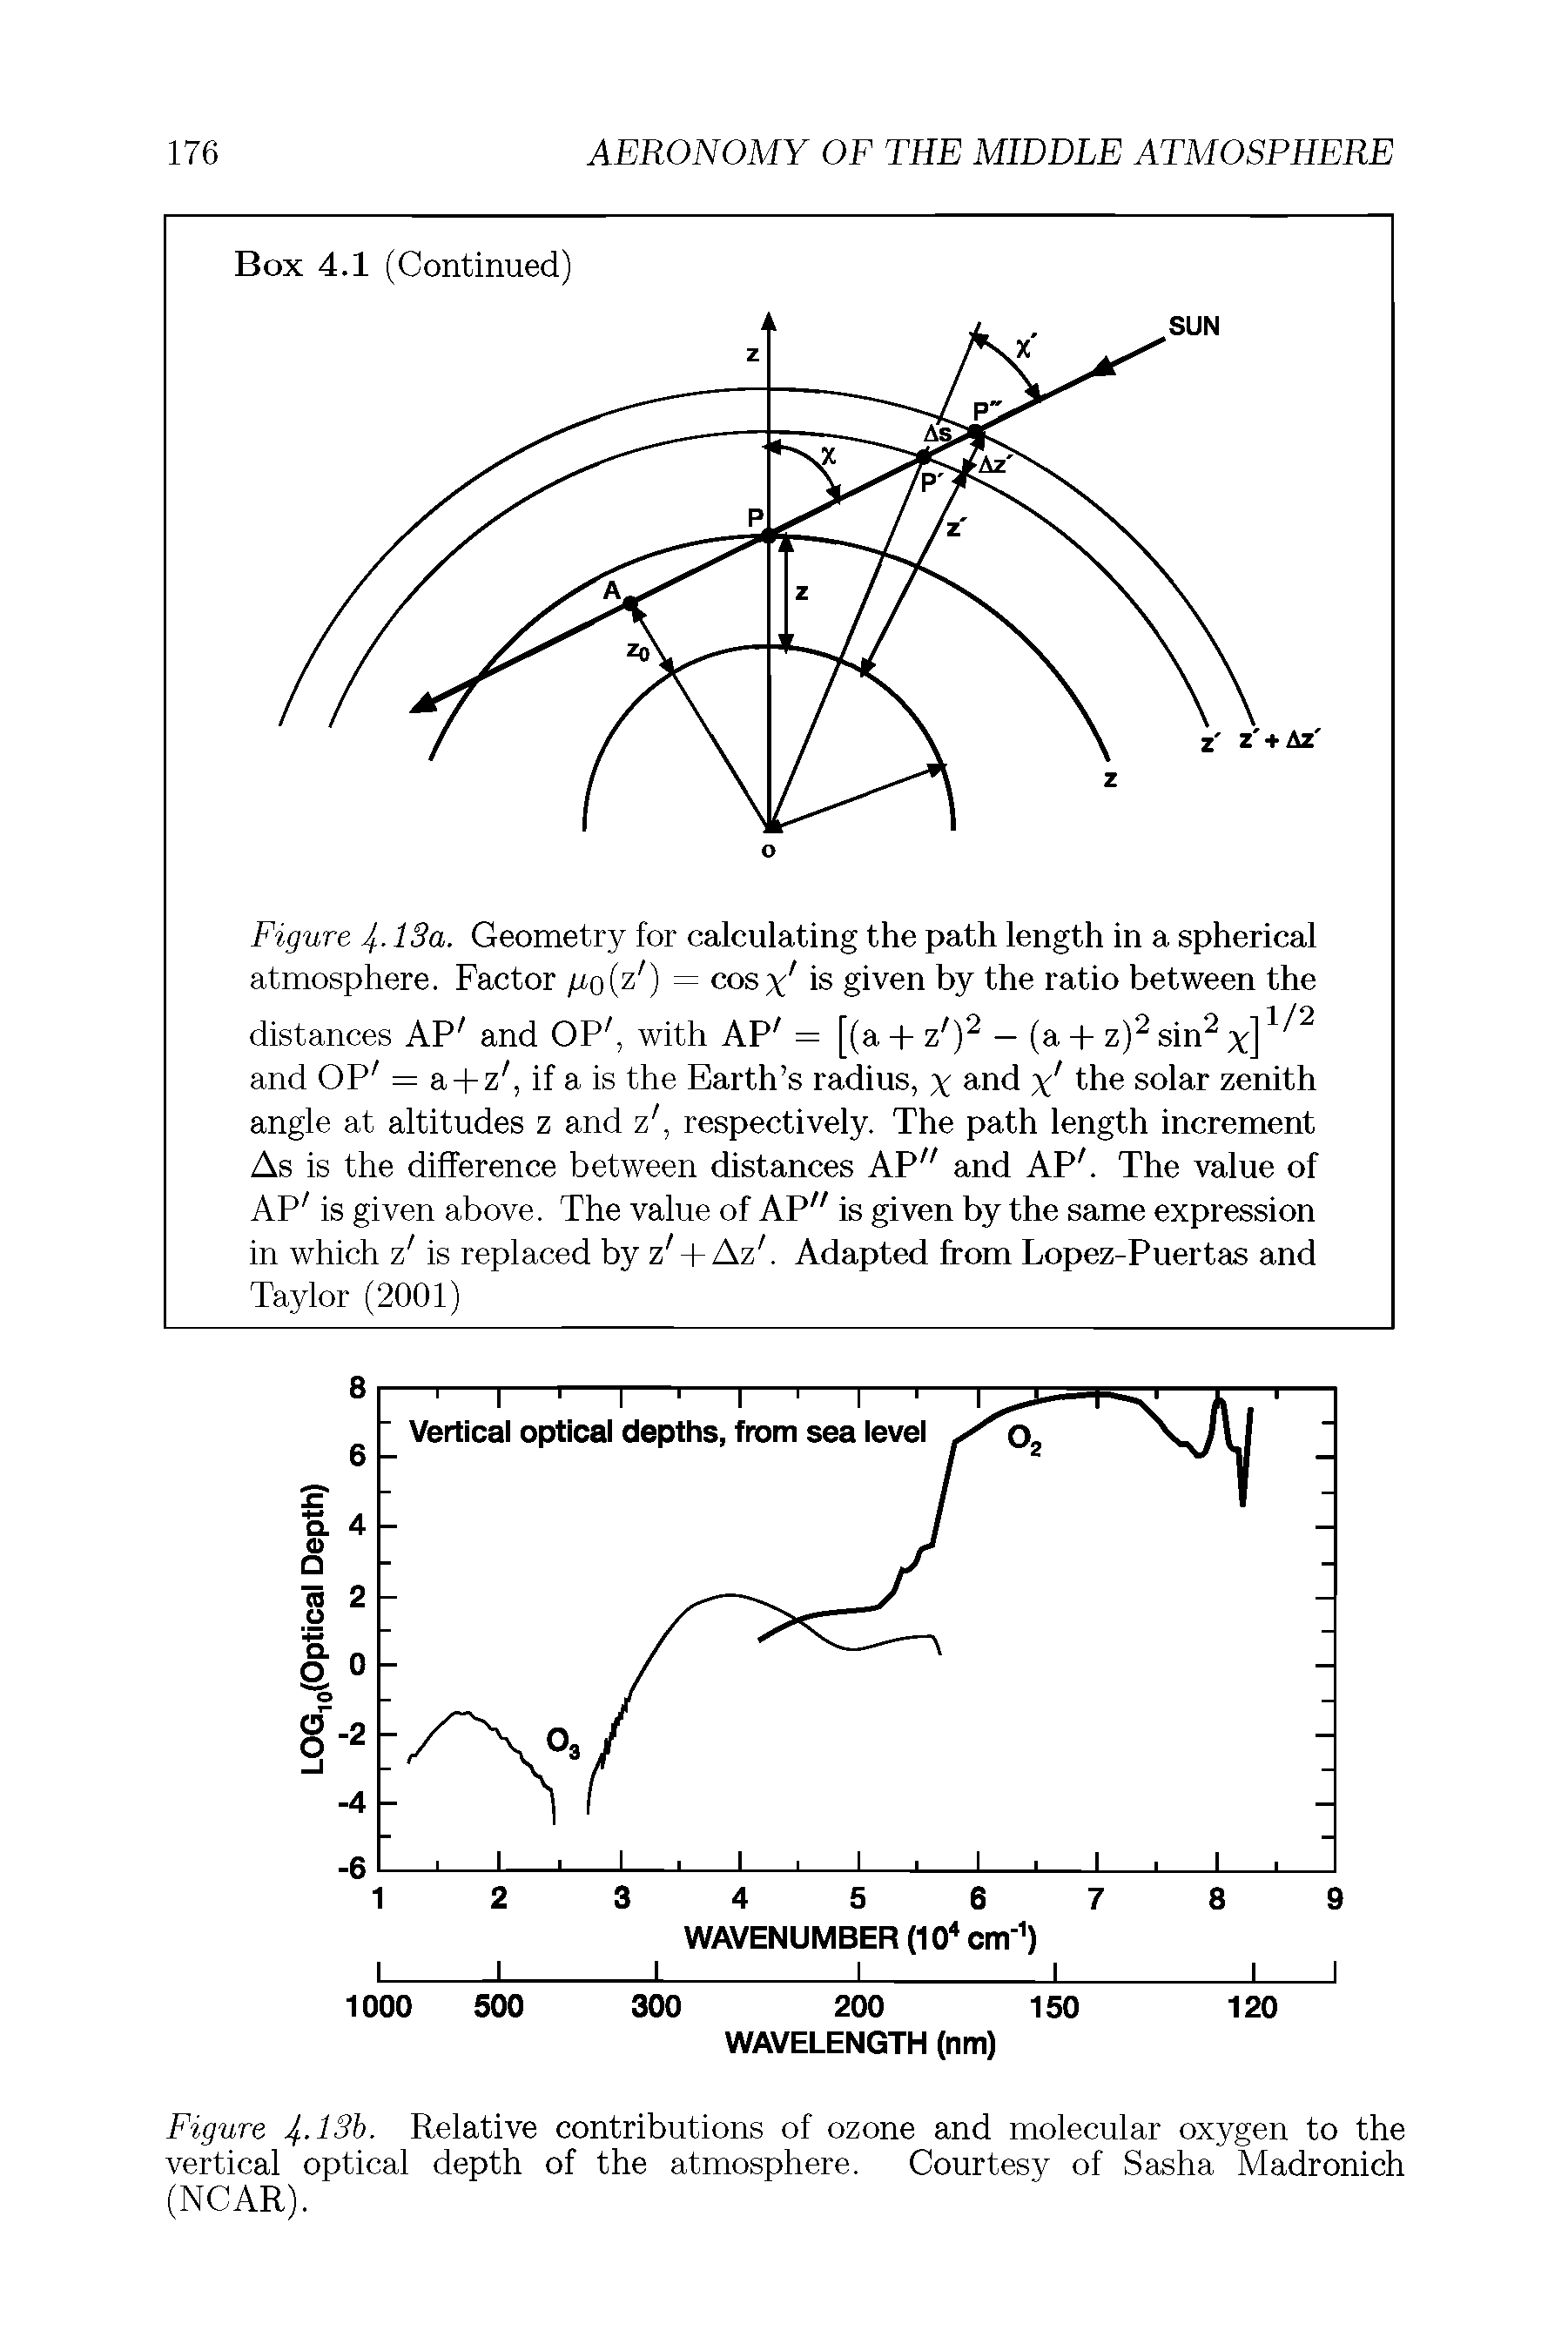 Figure 4-13a. Geometry for calculating the path length in a spherical atmosphere. Factor po(z0 = cosy is given by the ratio between the...